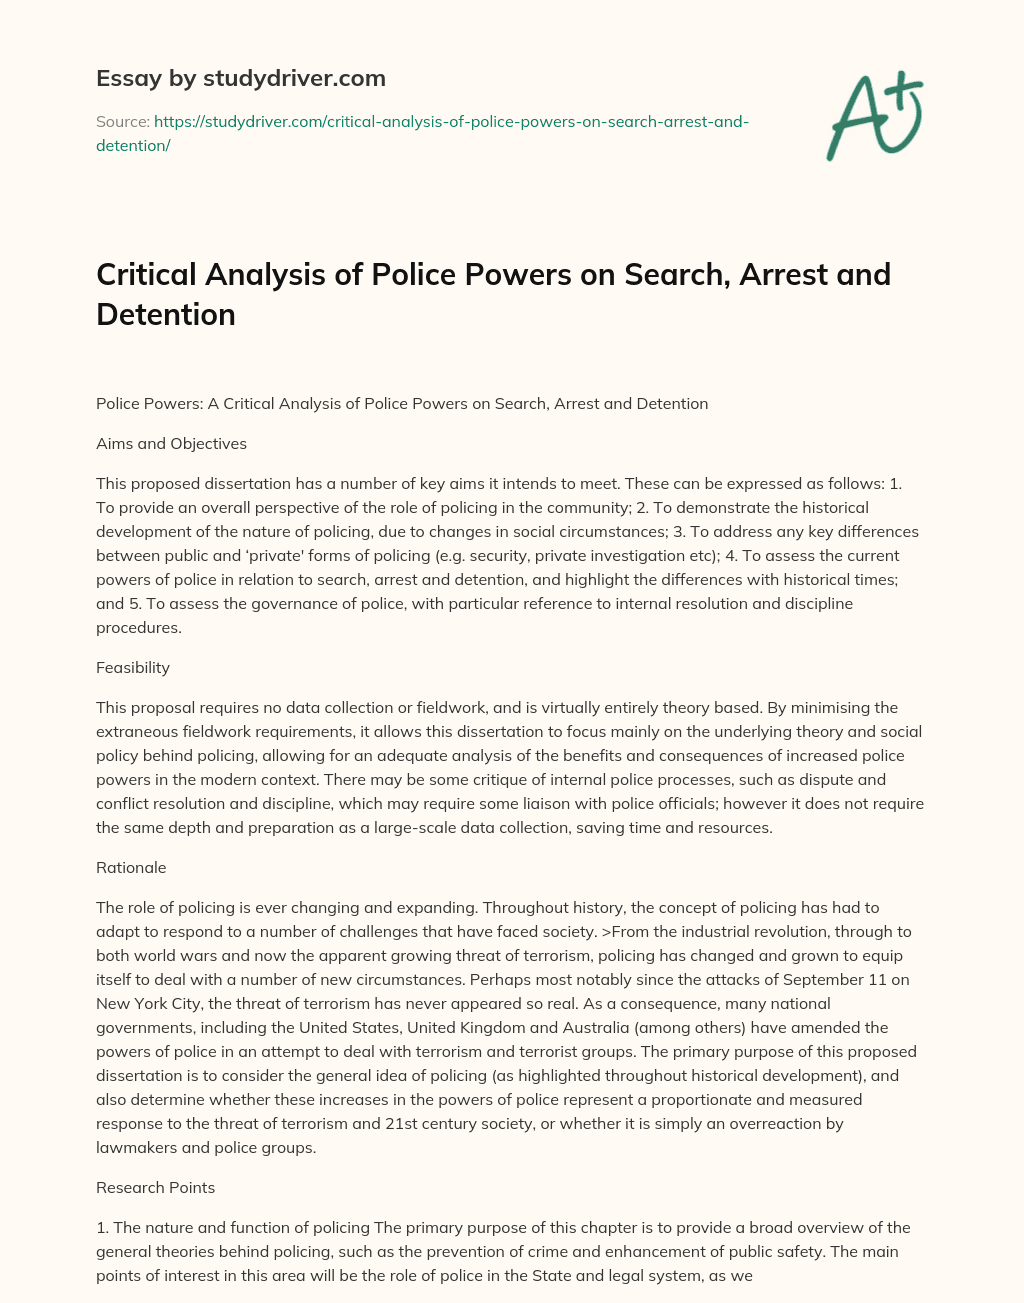 Critical Analysis of Police Powers on Search, Arrest and Detention essay